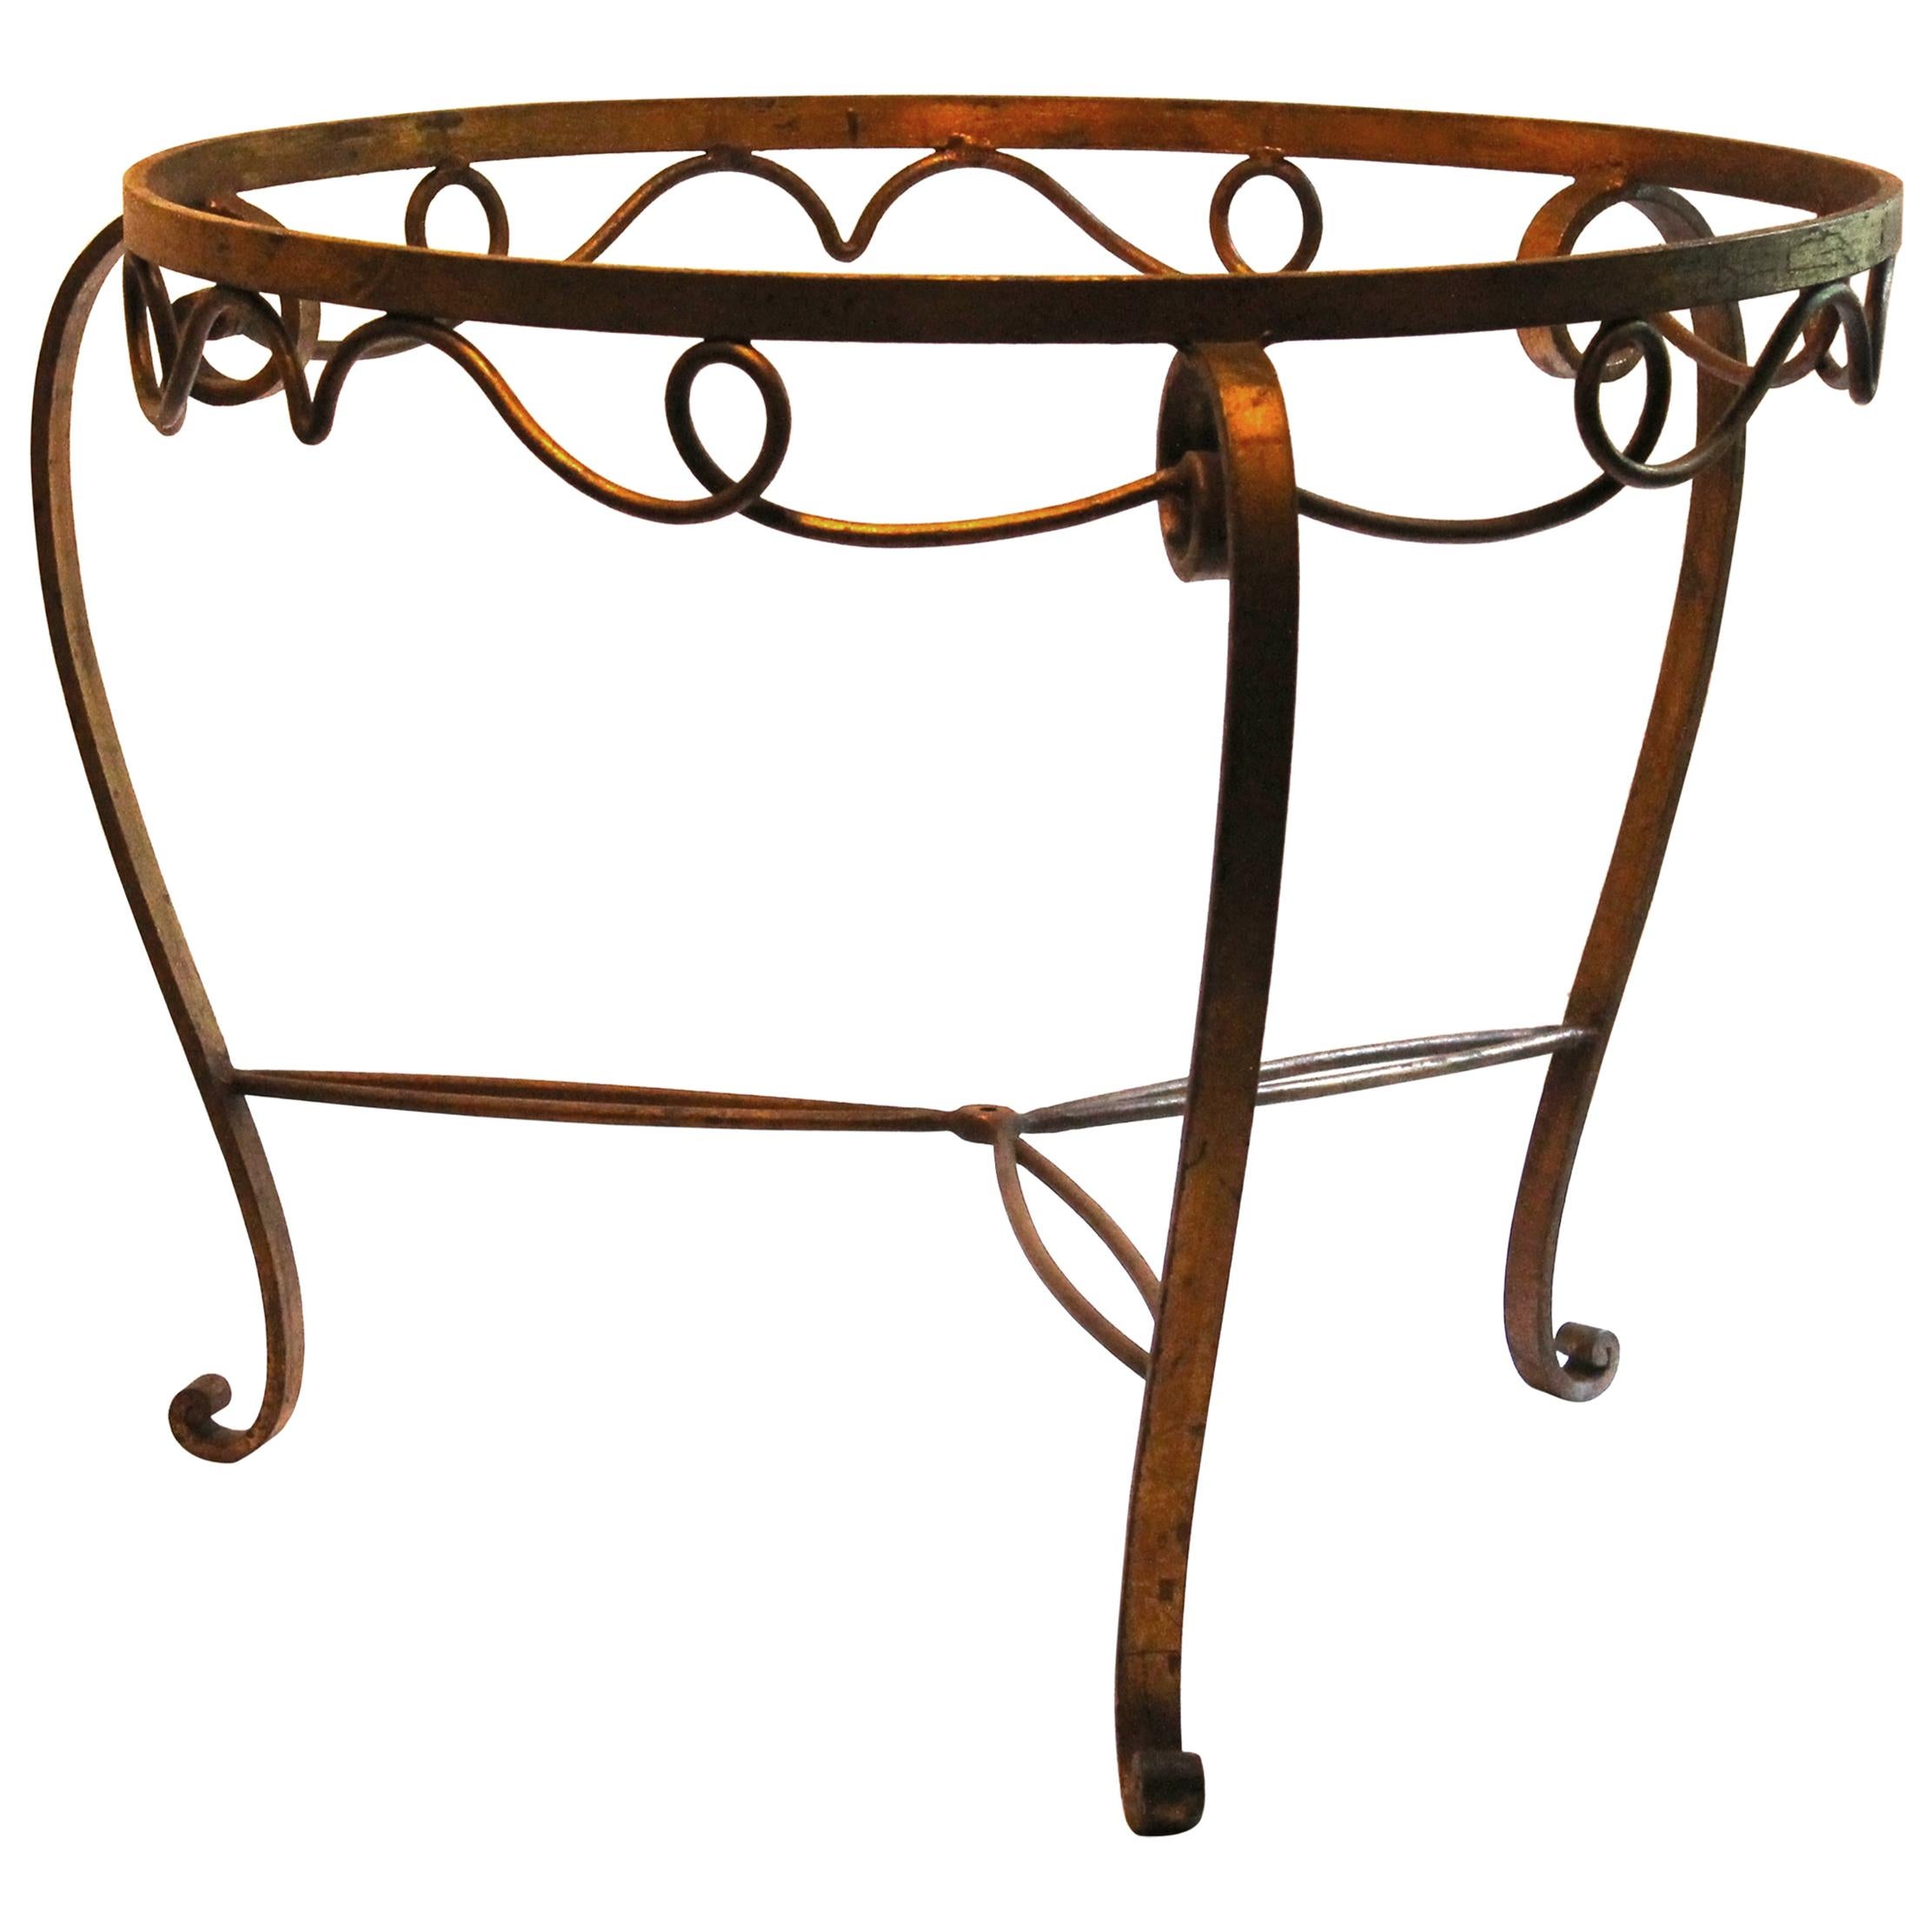 Rene Drouet Style Gilded Wrought Iron Coffee Table For Sale